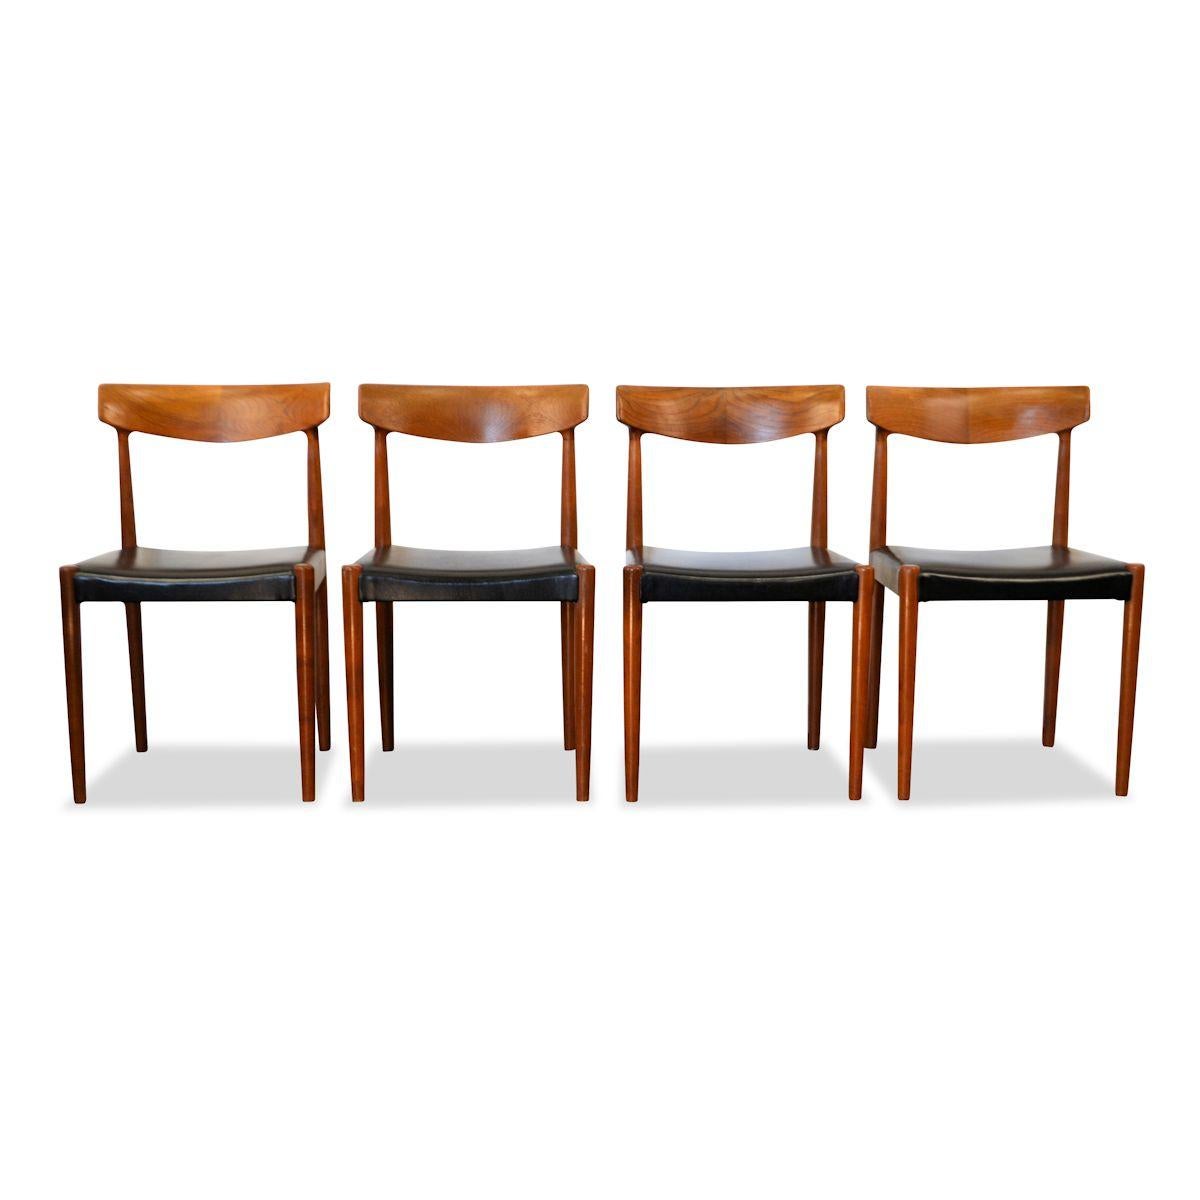 Leather Vintage Knud Faerch Teak Dining Chairs, Set of 4 For Sale